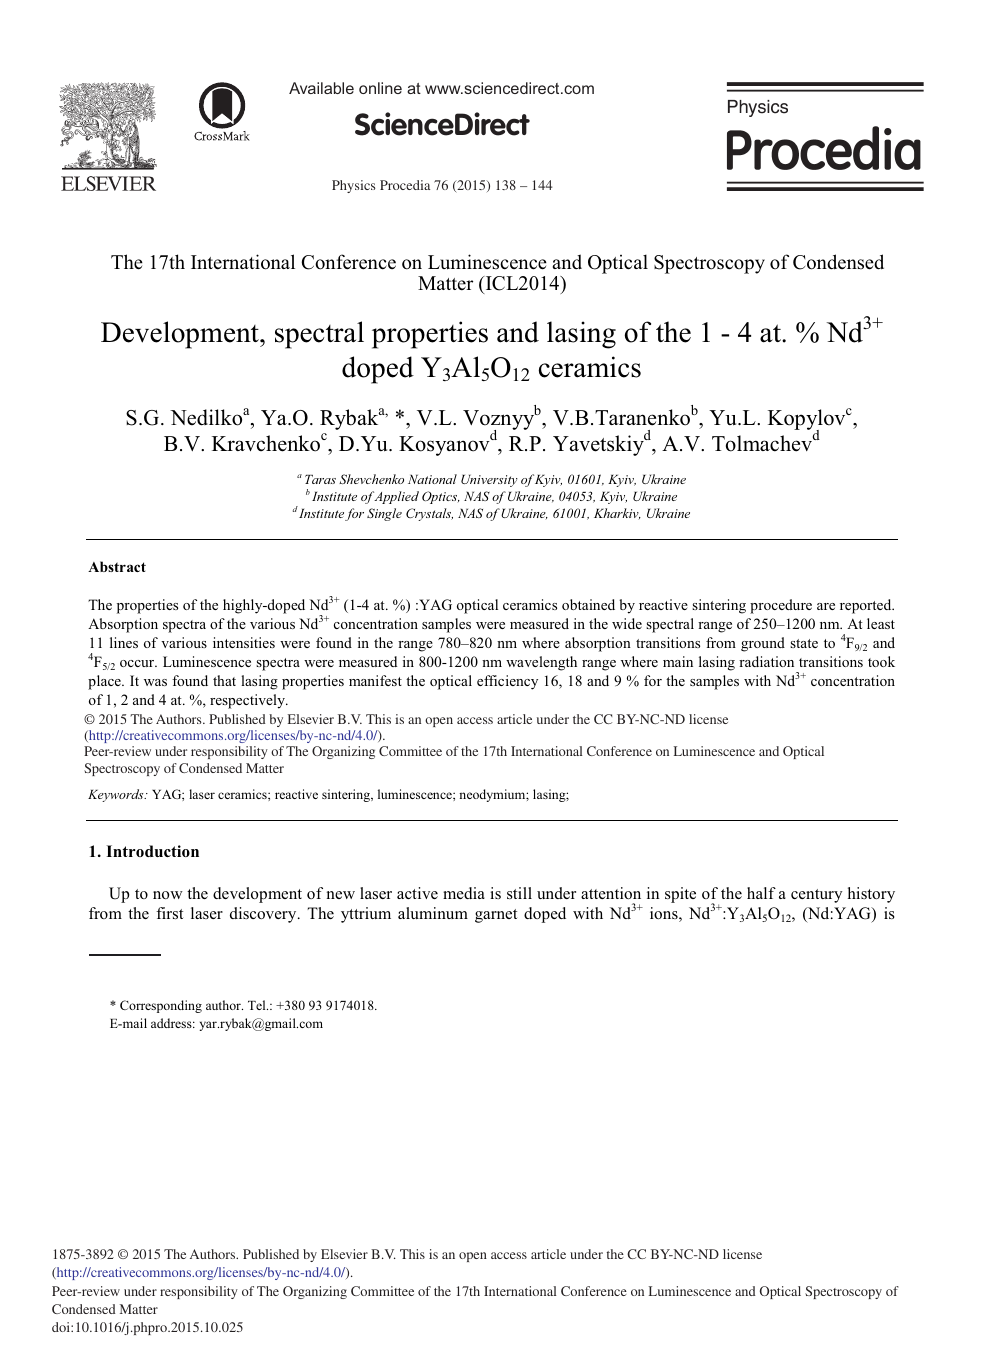 Development Spectral Properties And Lasing Of The 1 4 At Nd3 Doped Y3al5o12 Ceramics Topic Of Research Paper In Materials Engineering Download Scholarly Article Pdf And Read For Free